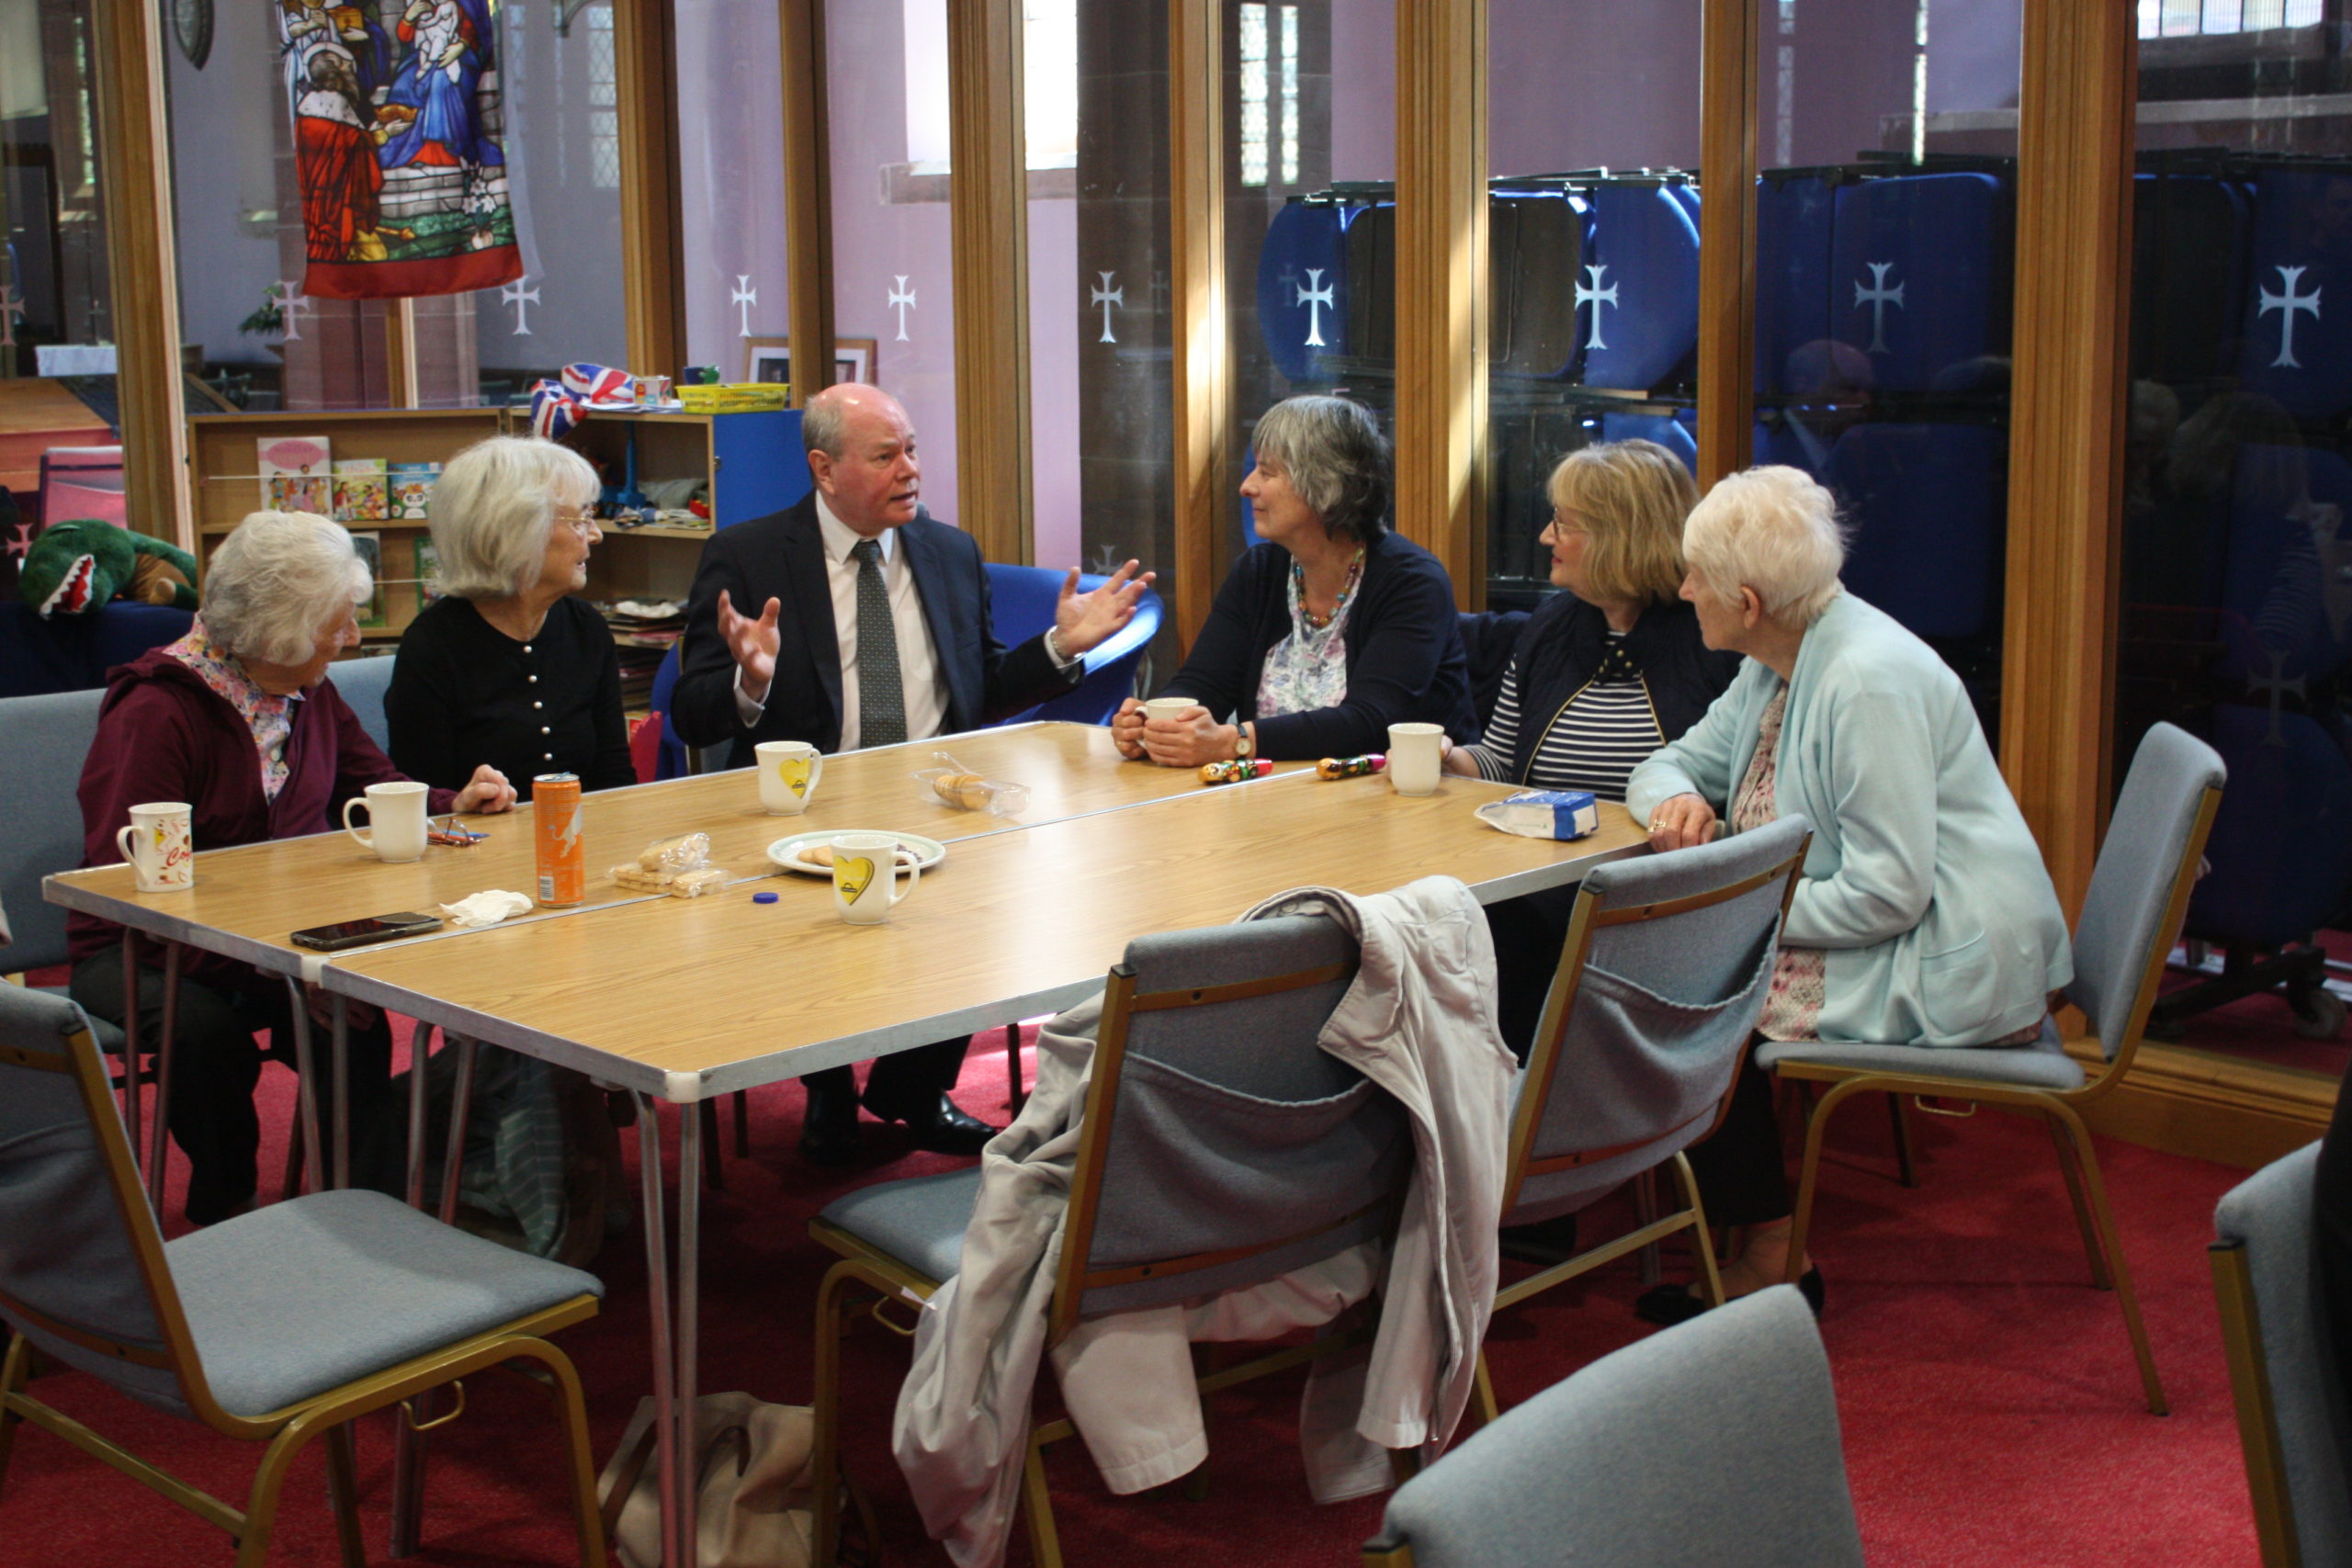 Duncan Smith from West Lancs Freemasons joins in a tabletop discussion.